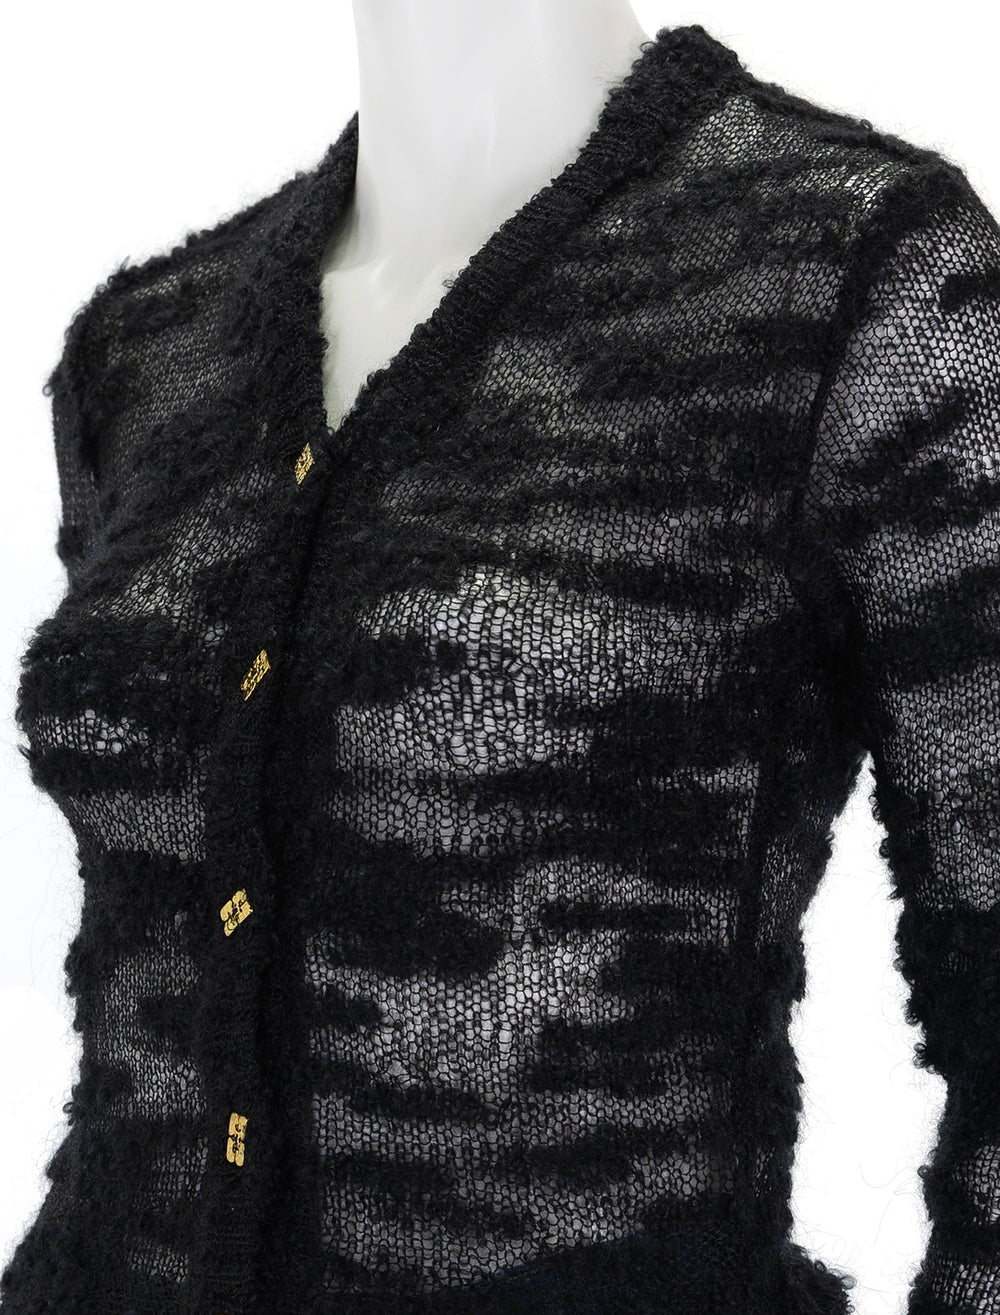 Close-up view of GANNI's boucle cardigan in black.